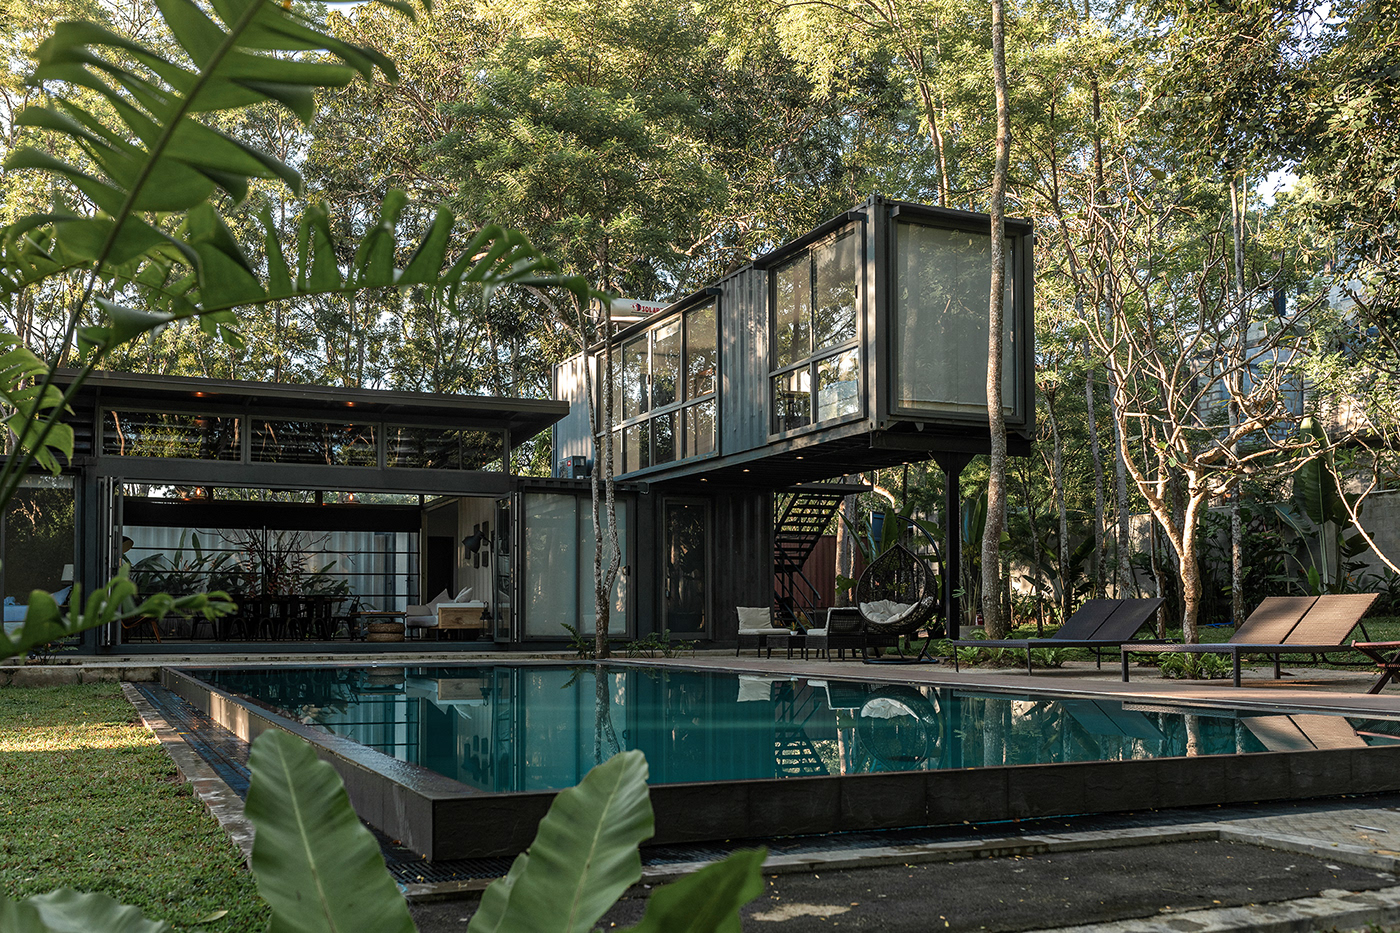 container architecture architecture adaptive reuse Tropical Design Sustainability sustainable architecture tropical architecture airbnb Travel Sri lanka